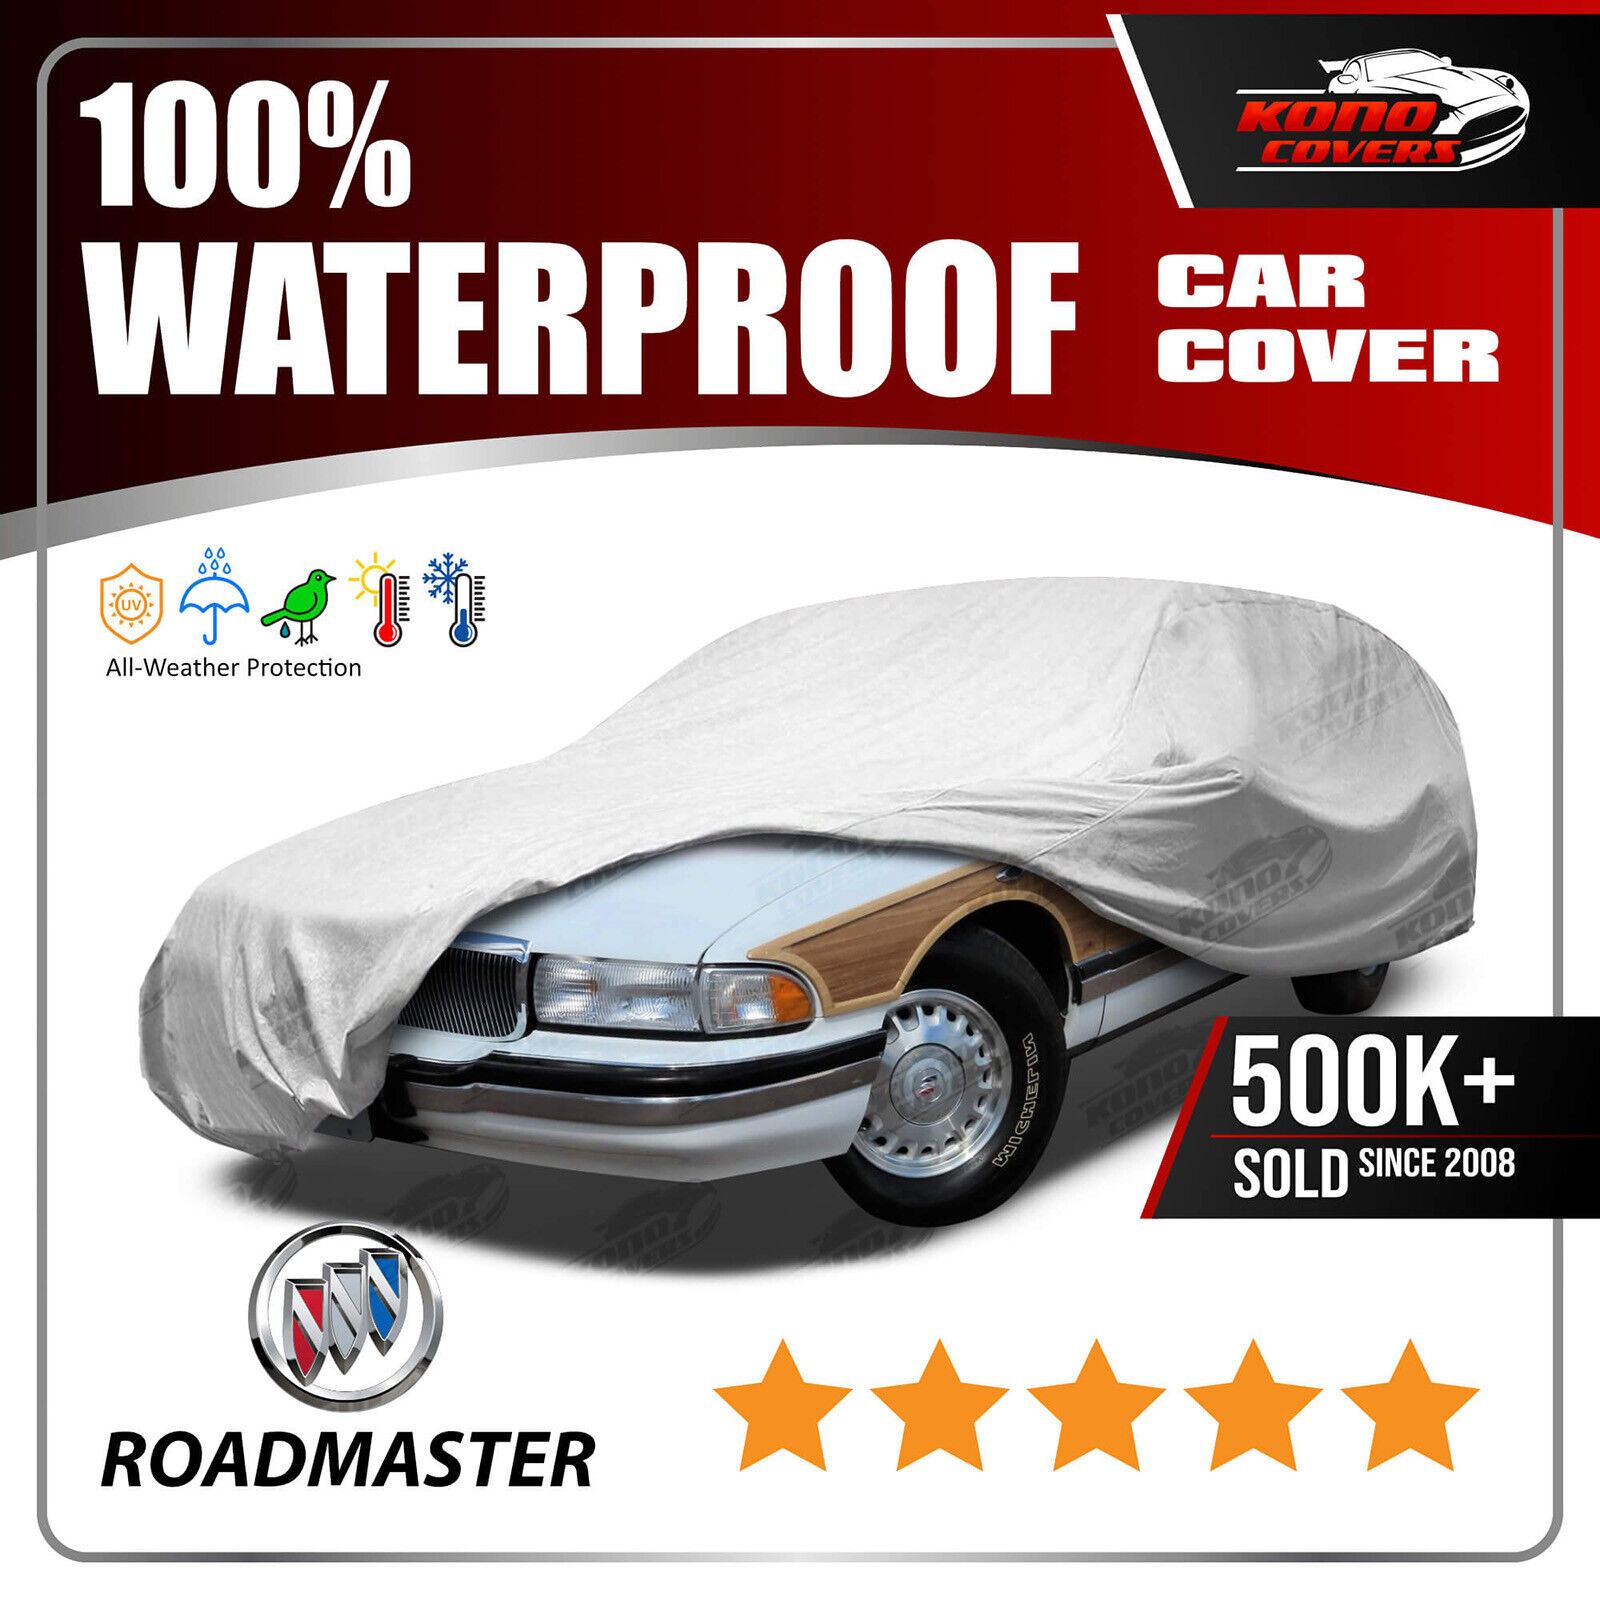 BUICK ROADMASTER Wagon 1991-1996 CAR COVER - 100% Waterproof 100% Breathable